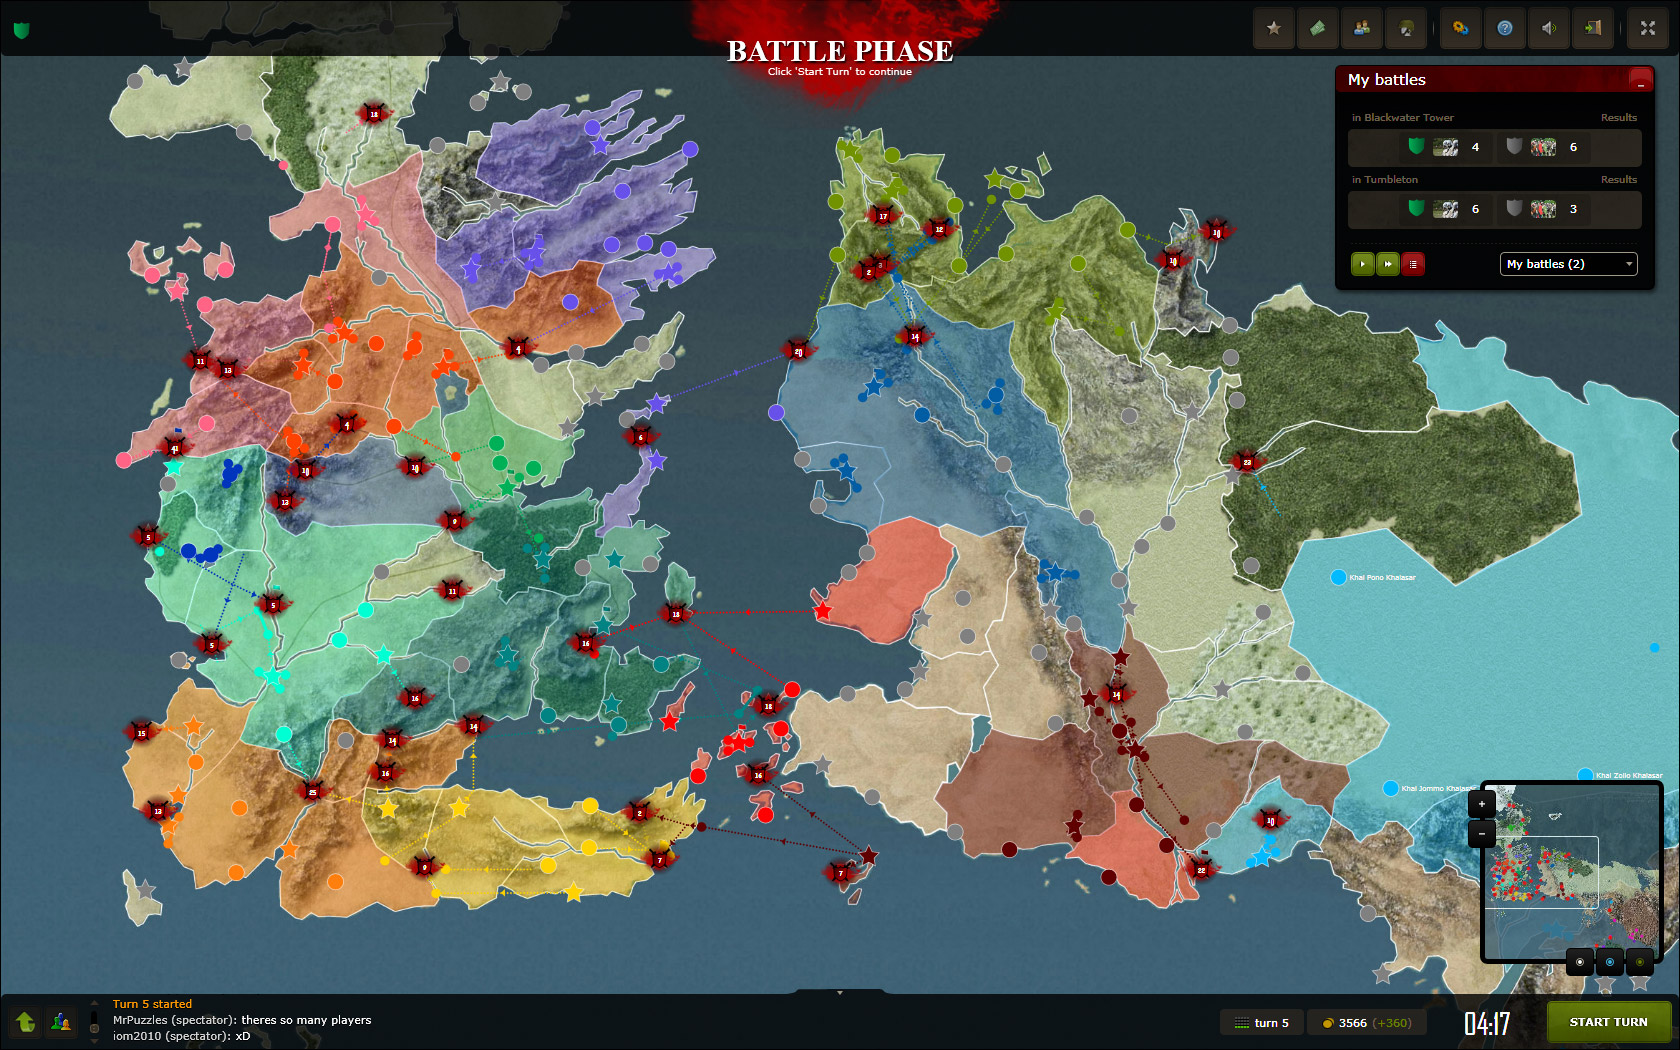 atWar - Play free multiplayer Strategy War Games like Risk Online and Axis  & Allies